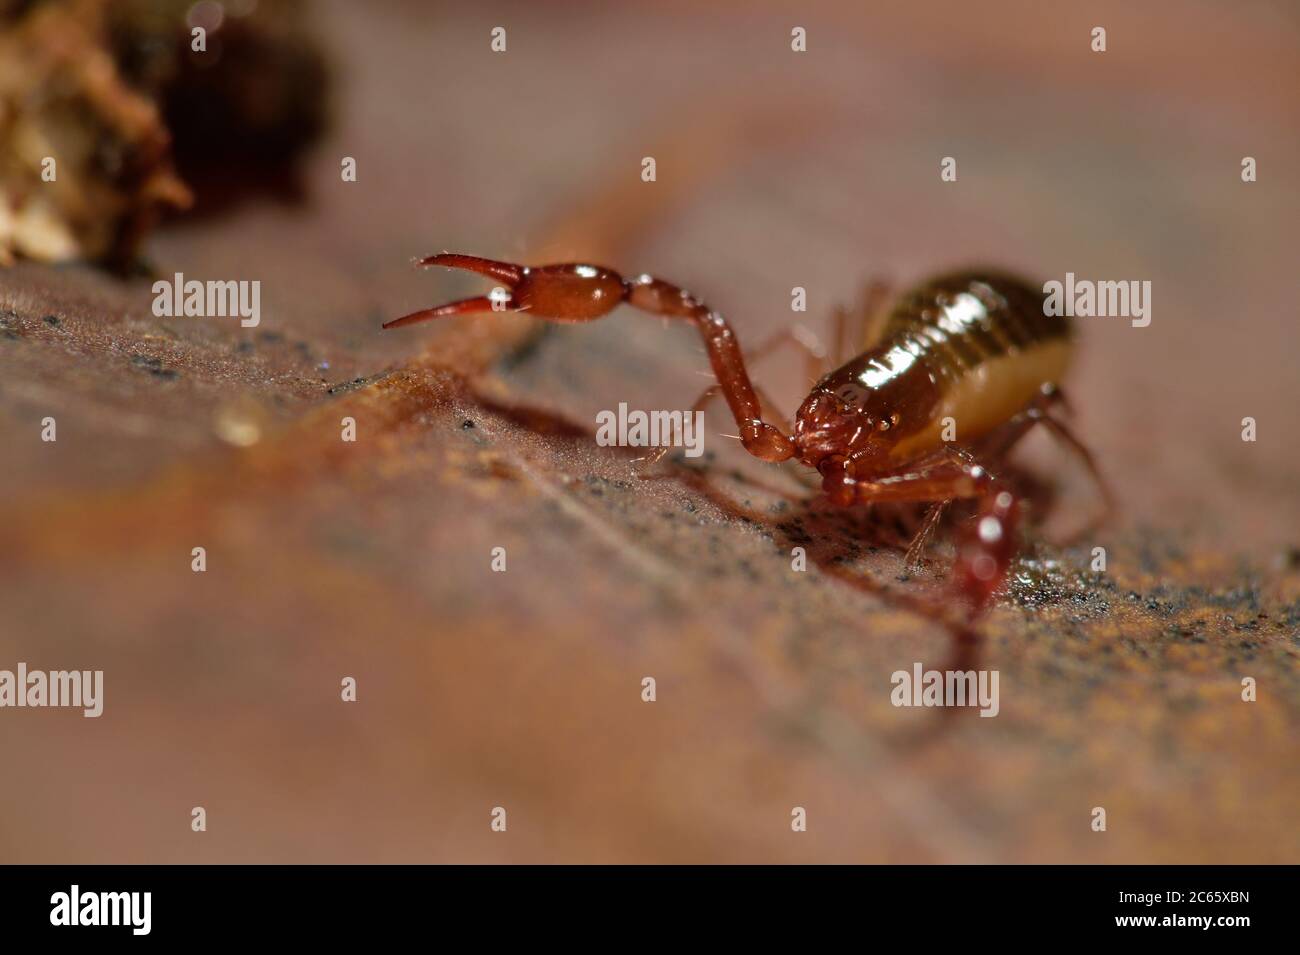 Pseudoscorpion (Chelifer cancroides) on fallen oak tree leaf, also known as a false scorpion or book scorpion, in leaf litter, Westensee, Kiel, Germany Stock Photo